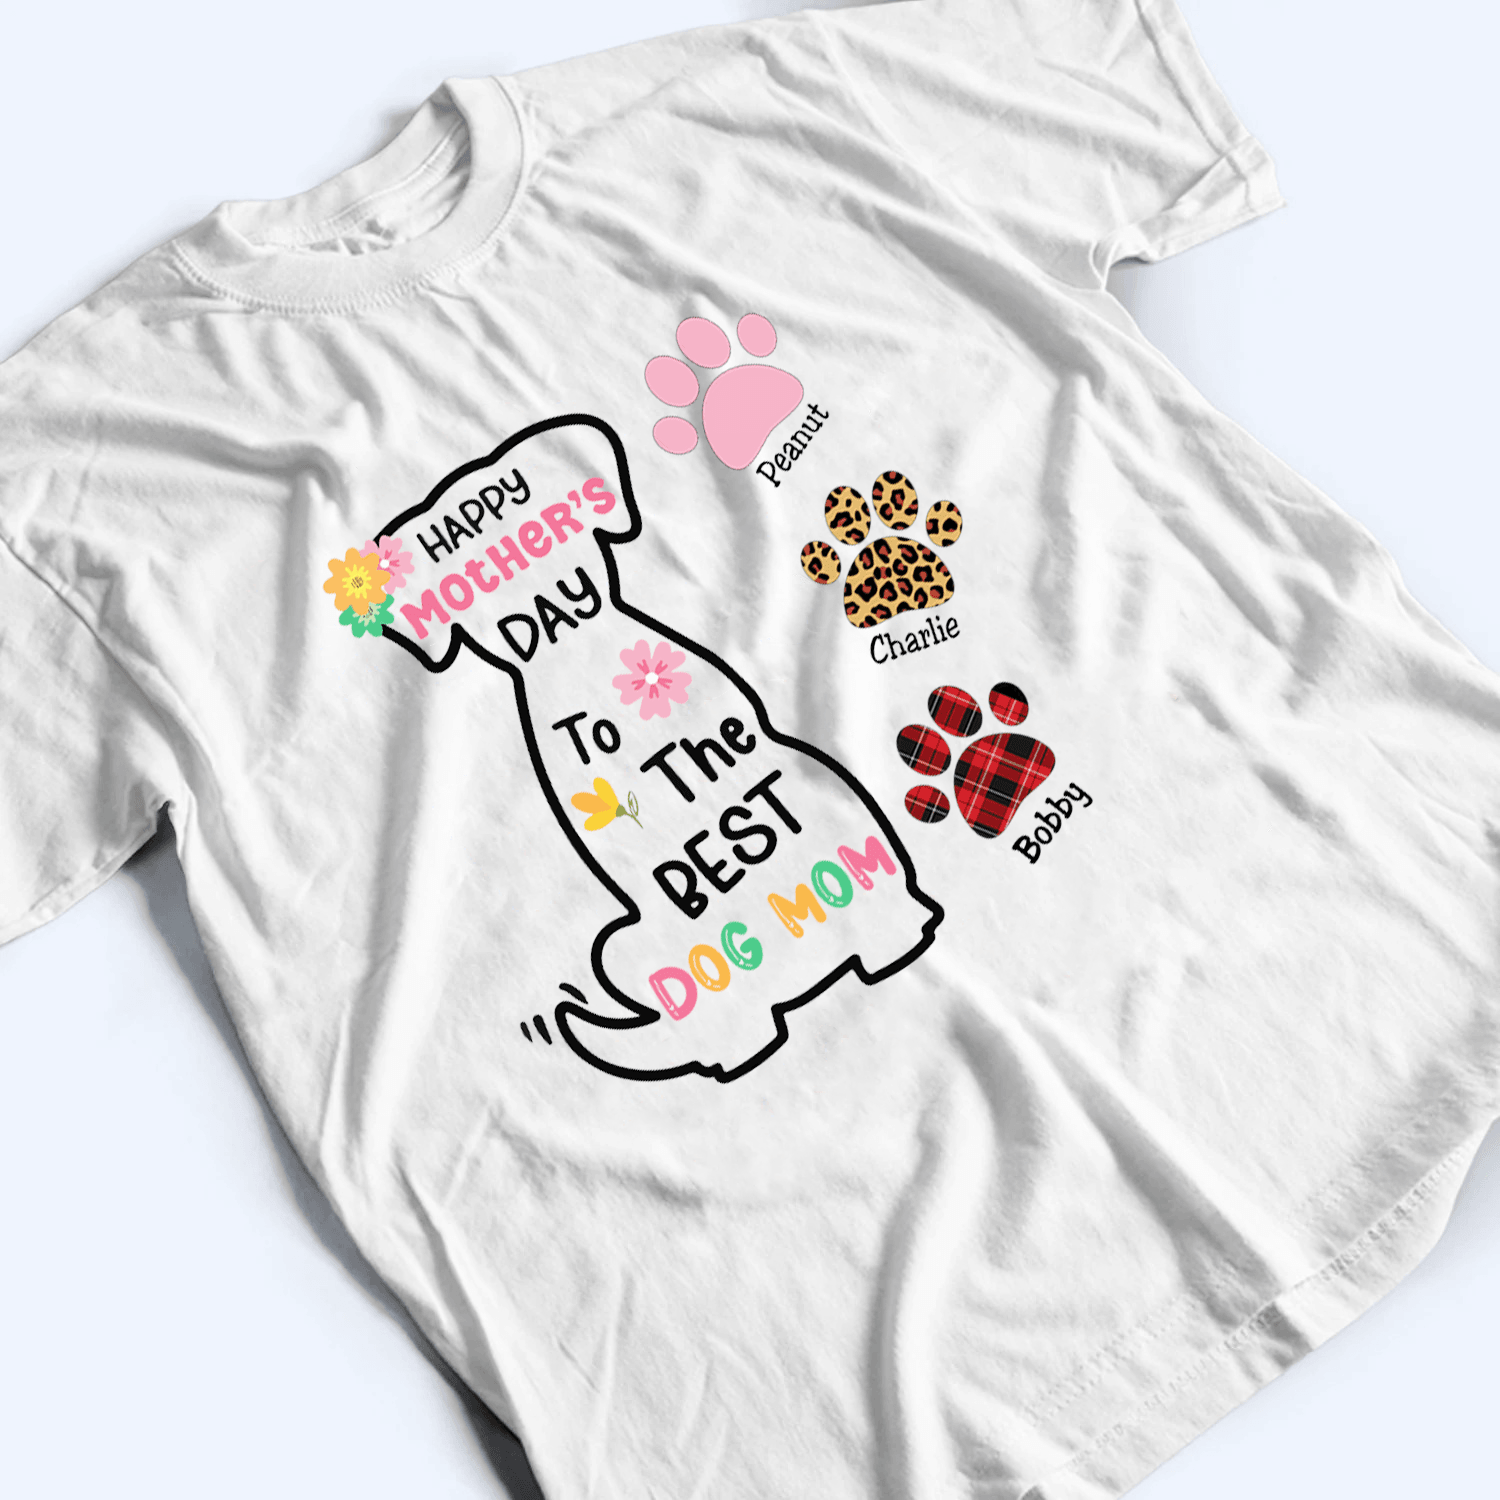 Happy Mother's Day To The Best Dog Mom - Personalized Custom T Shirt - Birthday, Loving, Funny Gift for Dog Mom, Dog Lovers, Pet Gifts for Mother's Day - Suzitee Store